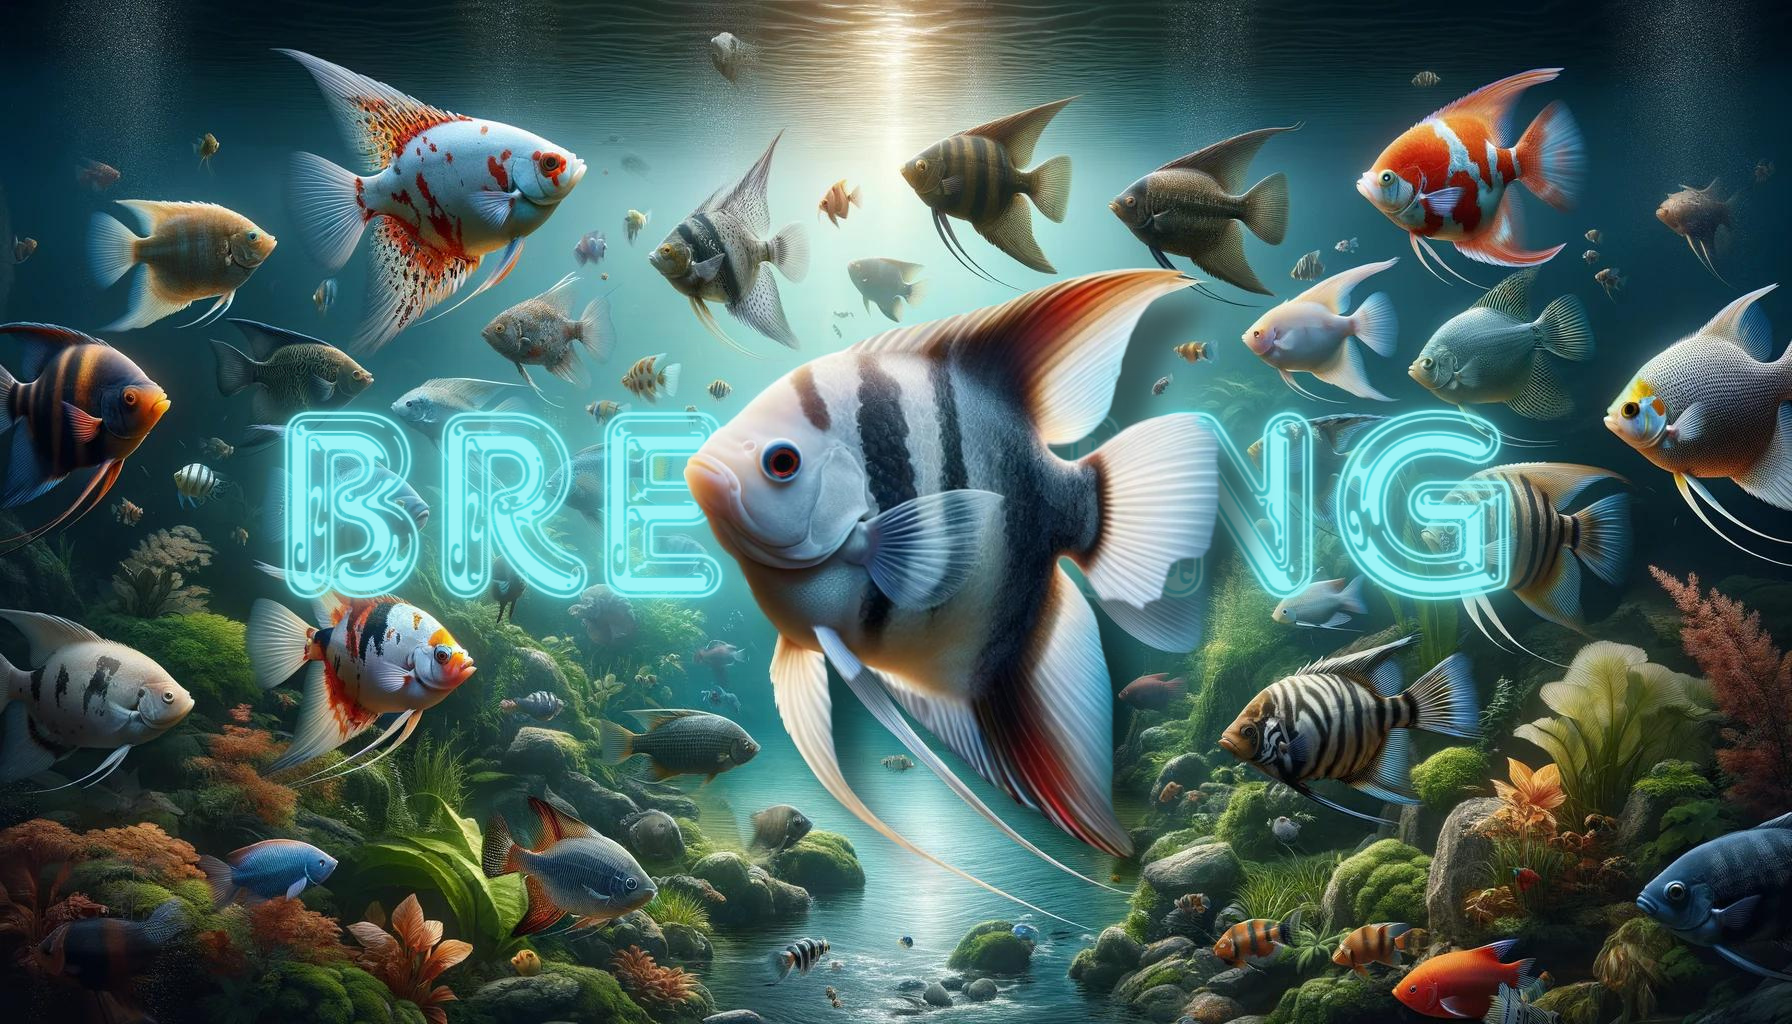 A vibrant depiction of koi angelfish swimming among a lush underwater scene, with the word "BREEDING" illuminated in a neon sign style, suggesting a focus on breeding angelfish.